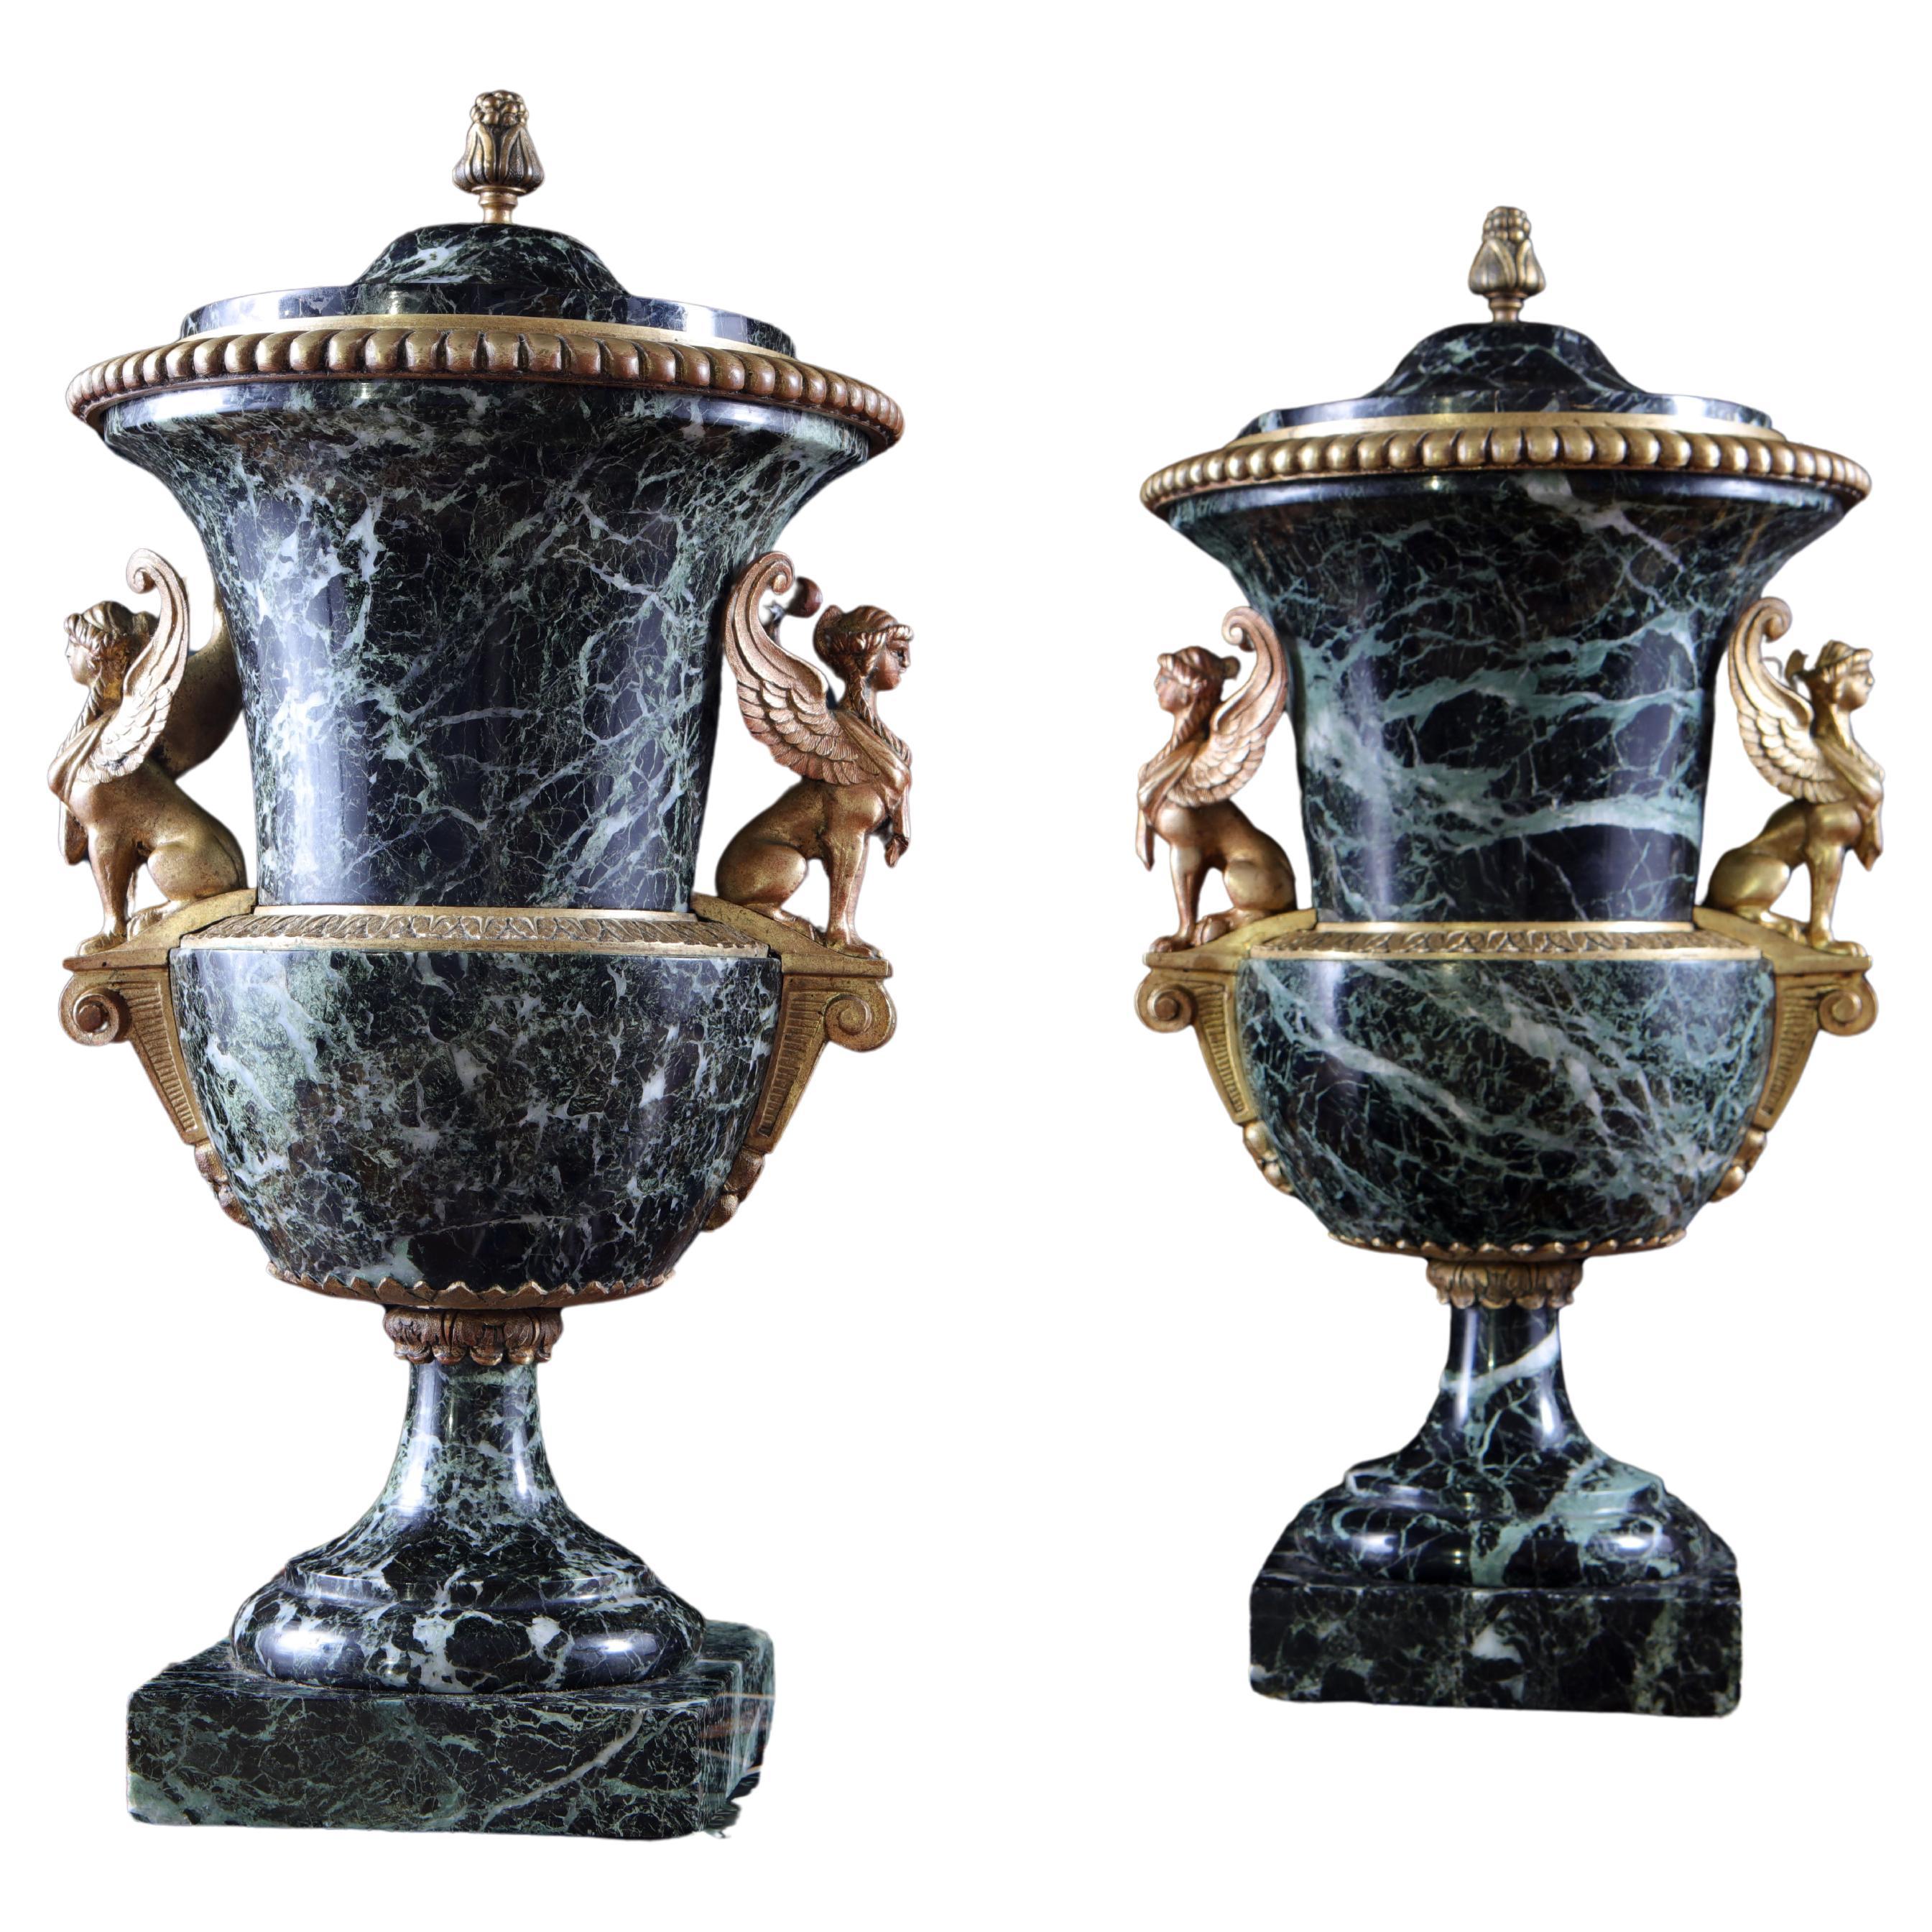 Pair Of Marble And Ormolu Classical Urns